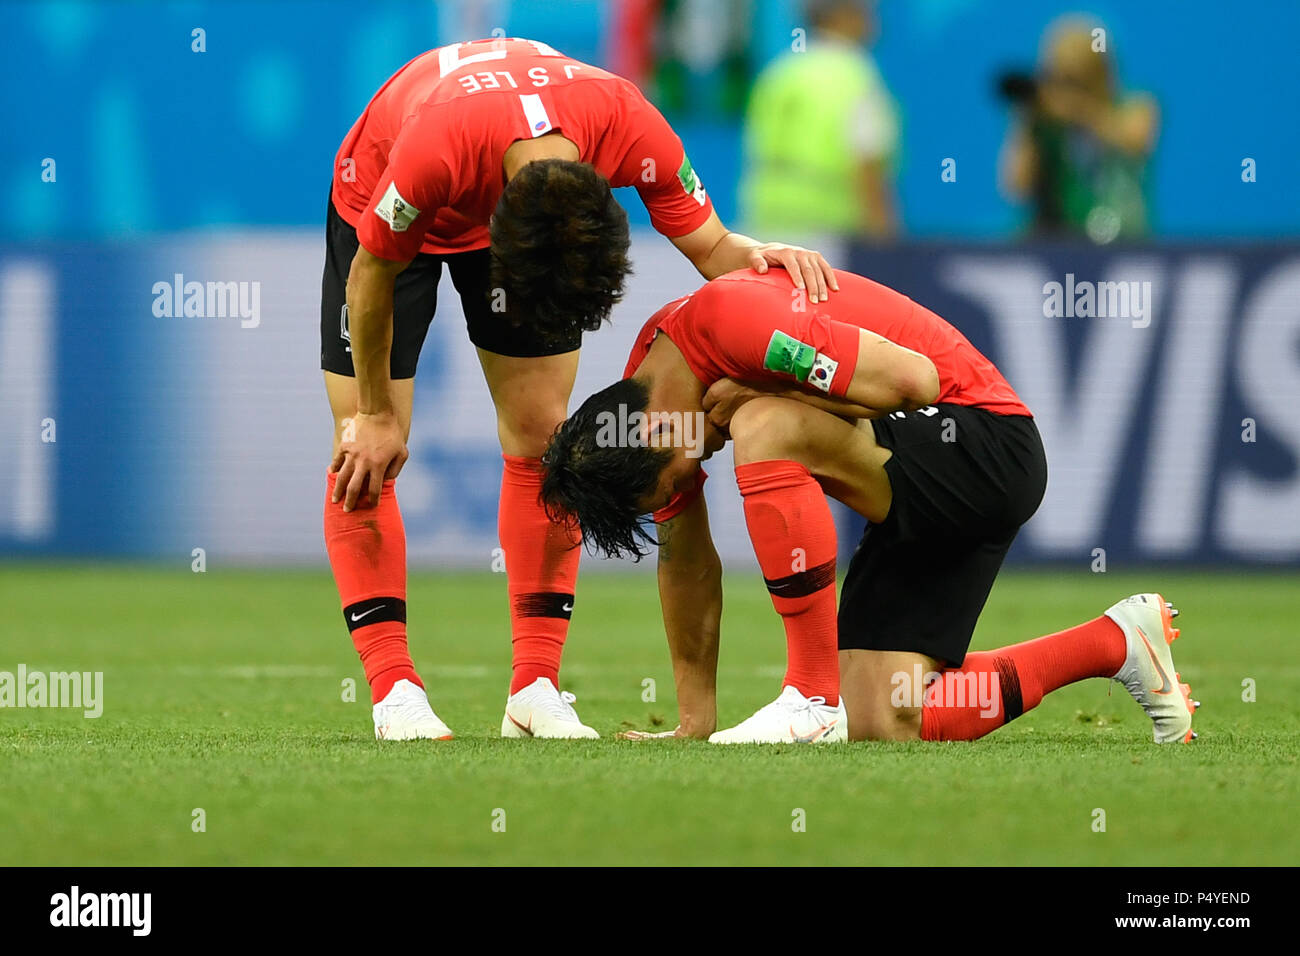 Rostov-on-Don, Russia. 23rd June, 2018. Soccer, FIFA World Cup 2018, South Korea vs Mexico, group stages, Group F, 2nd matchday at the Rostov-on-Don Stadium: Jaeseong Lee and Yong Lee from South Korea. Credit: Marius Becker/dpa/Alamy Live News Stock Photo